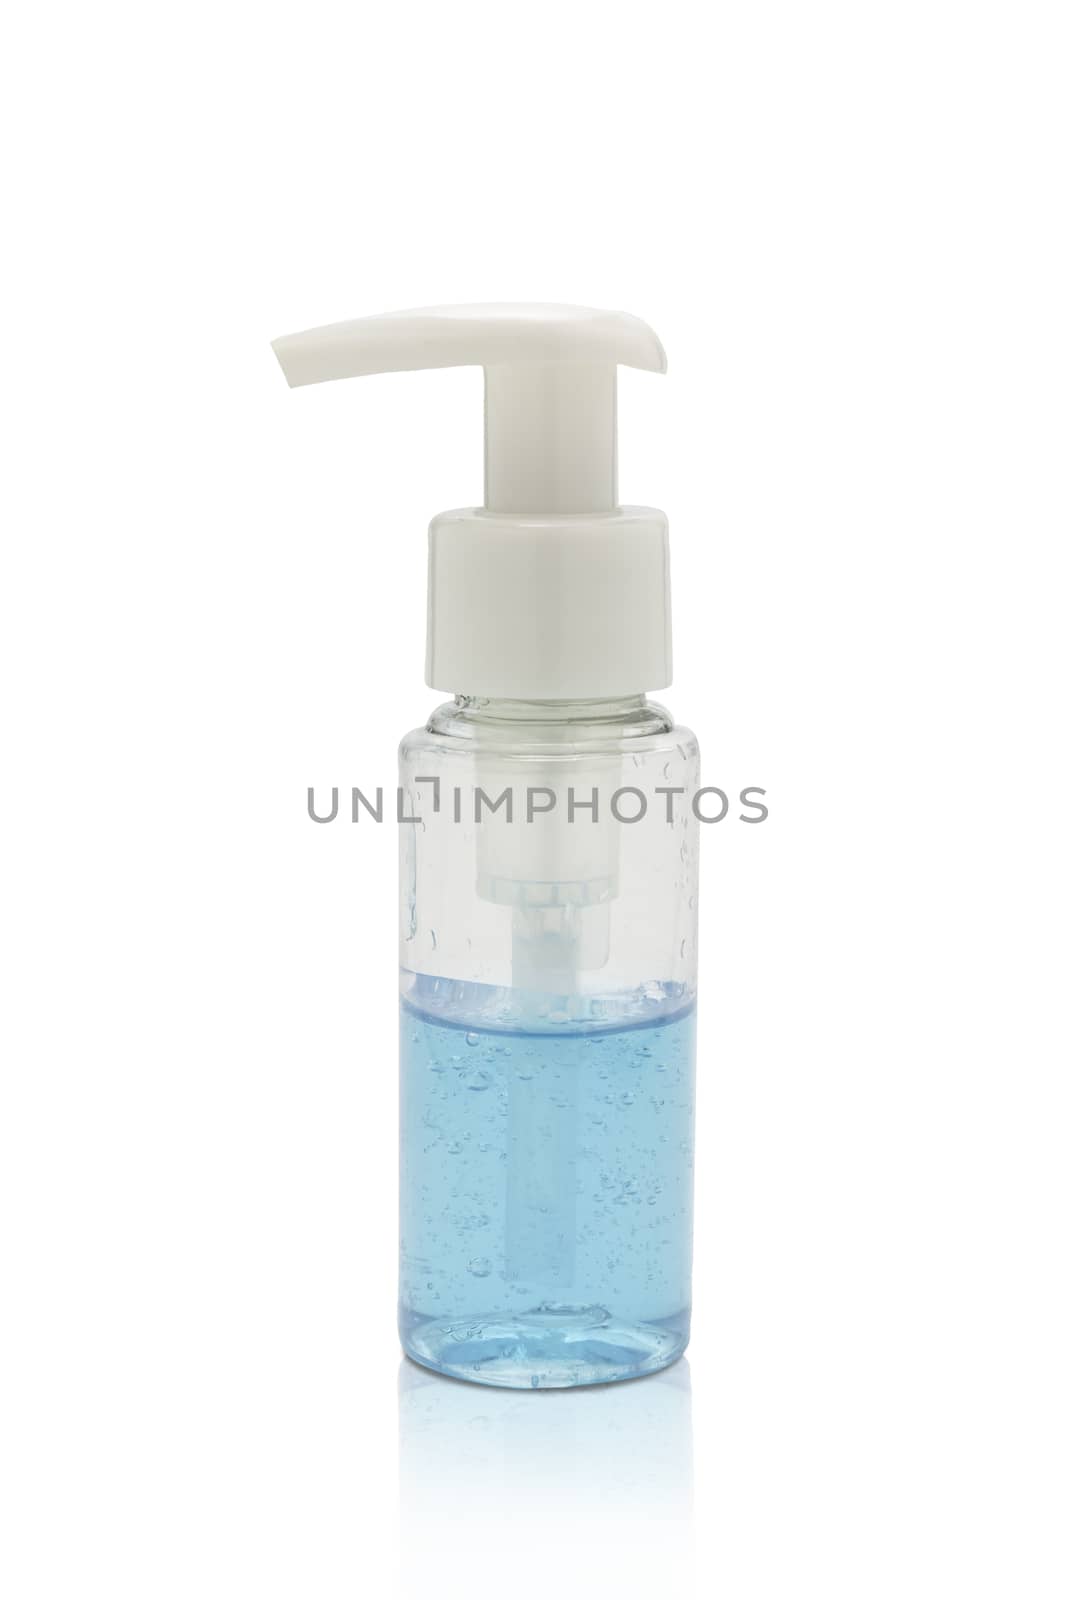 An alcohol gel for washing hands. Hands gel for cleaning protect corona virus and germs with clipping path.